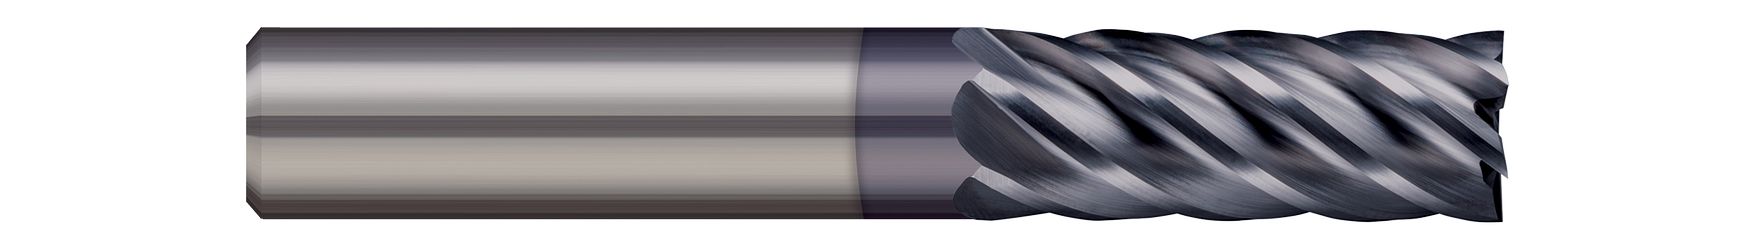 End Mills for Steels & High Temperature Alloys-Square-4 & 6 Flute 